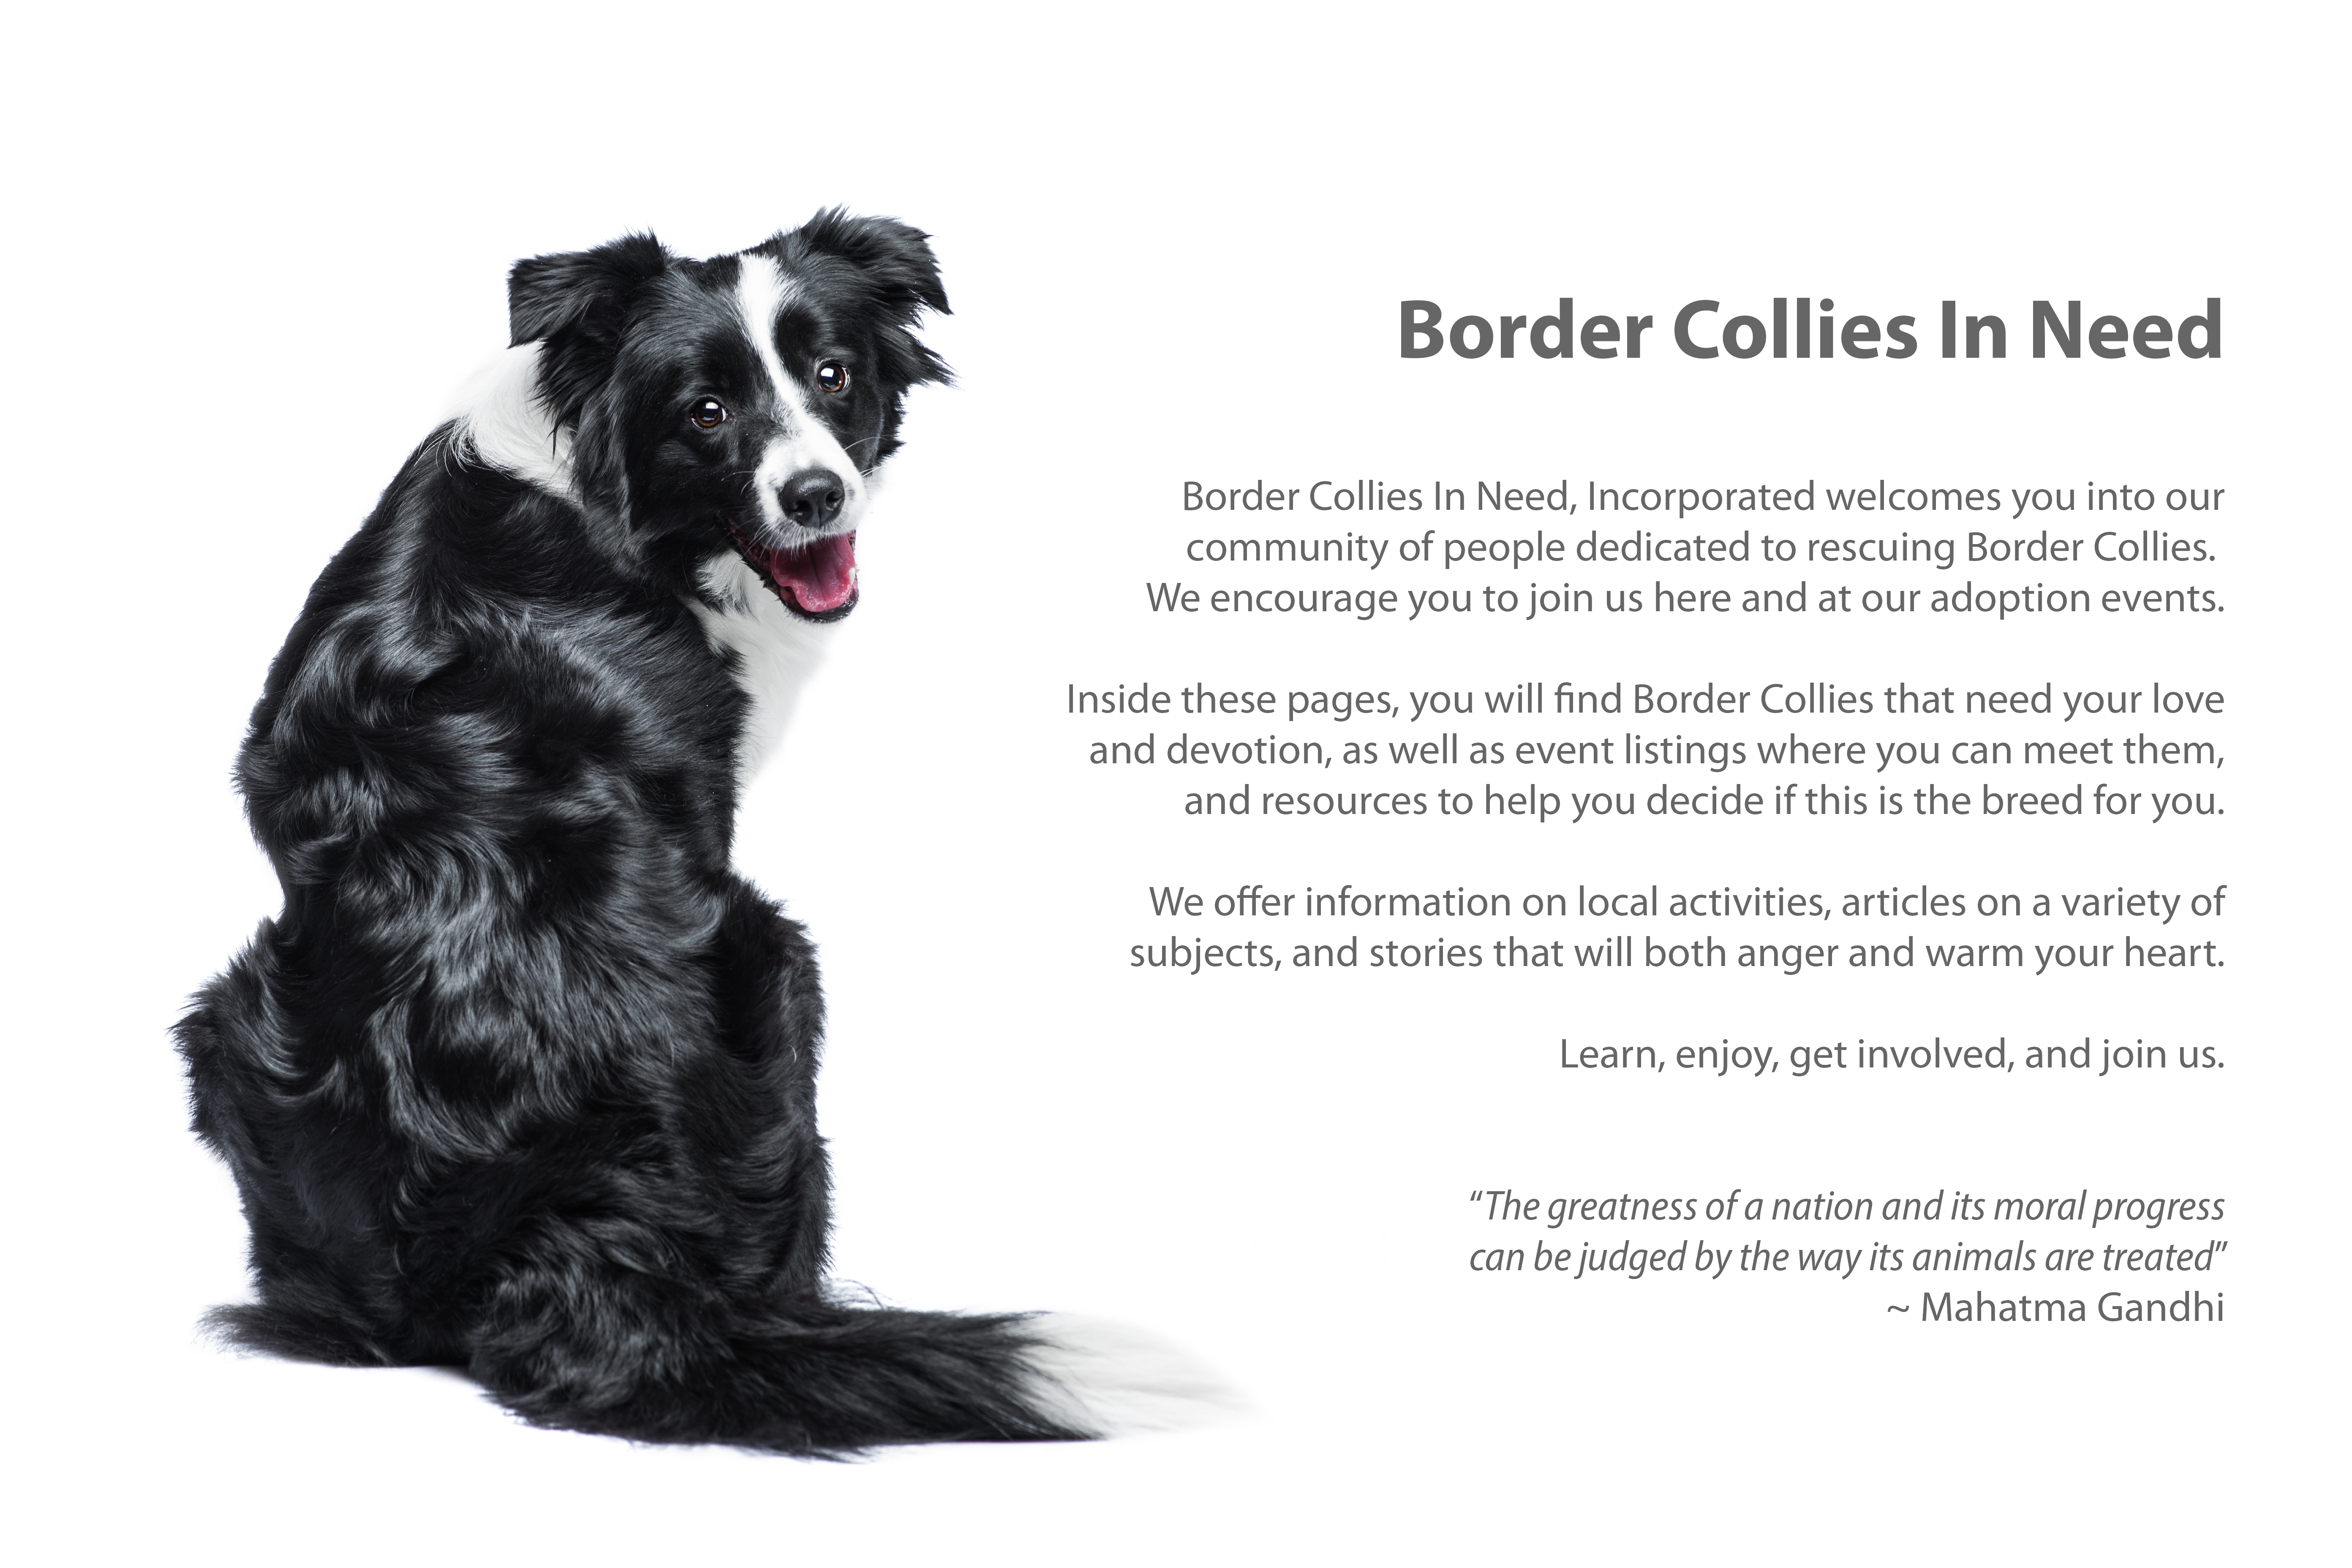 Adopting A Border Collie: What You Need To Know